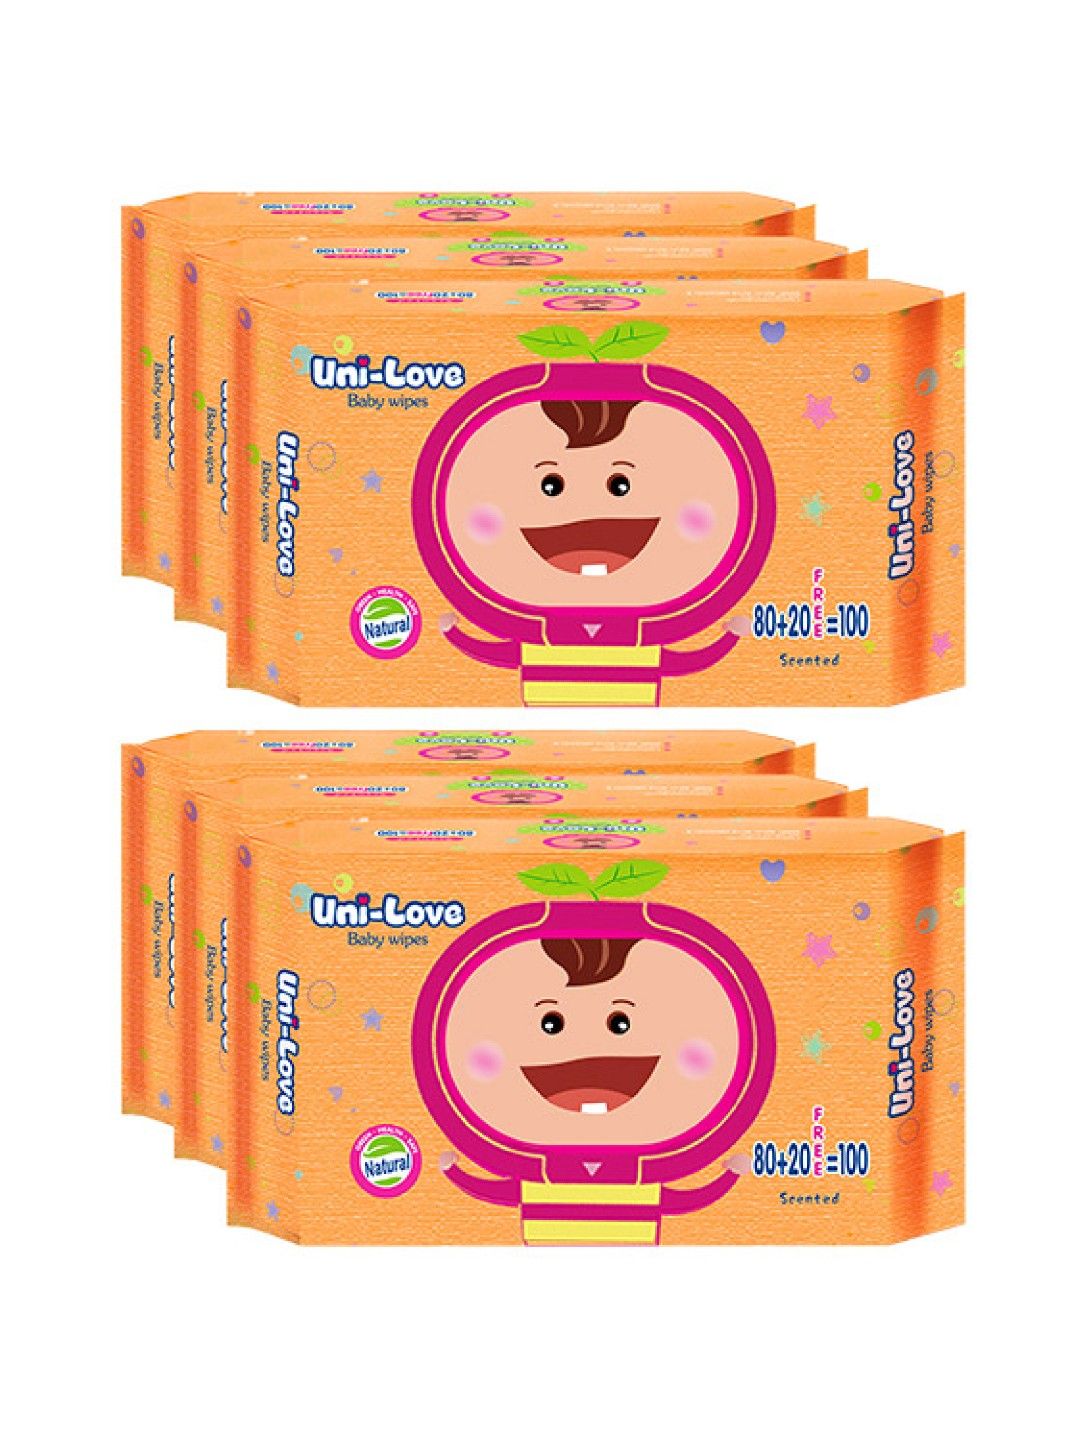 Uni-love Powder Scent Baby Wipes 100's (6-Pack)